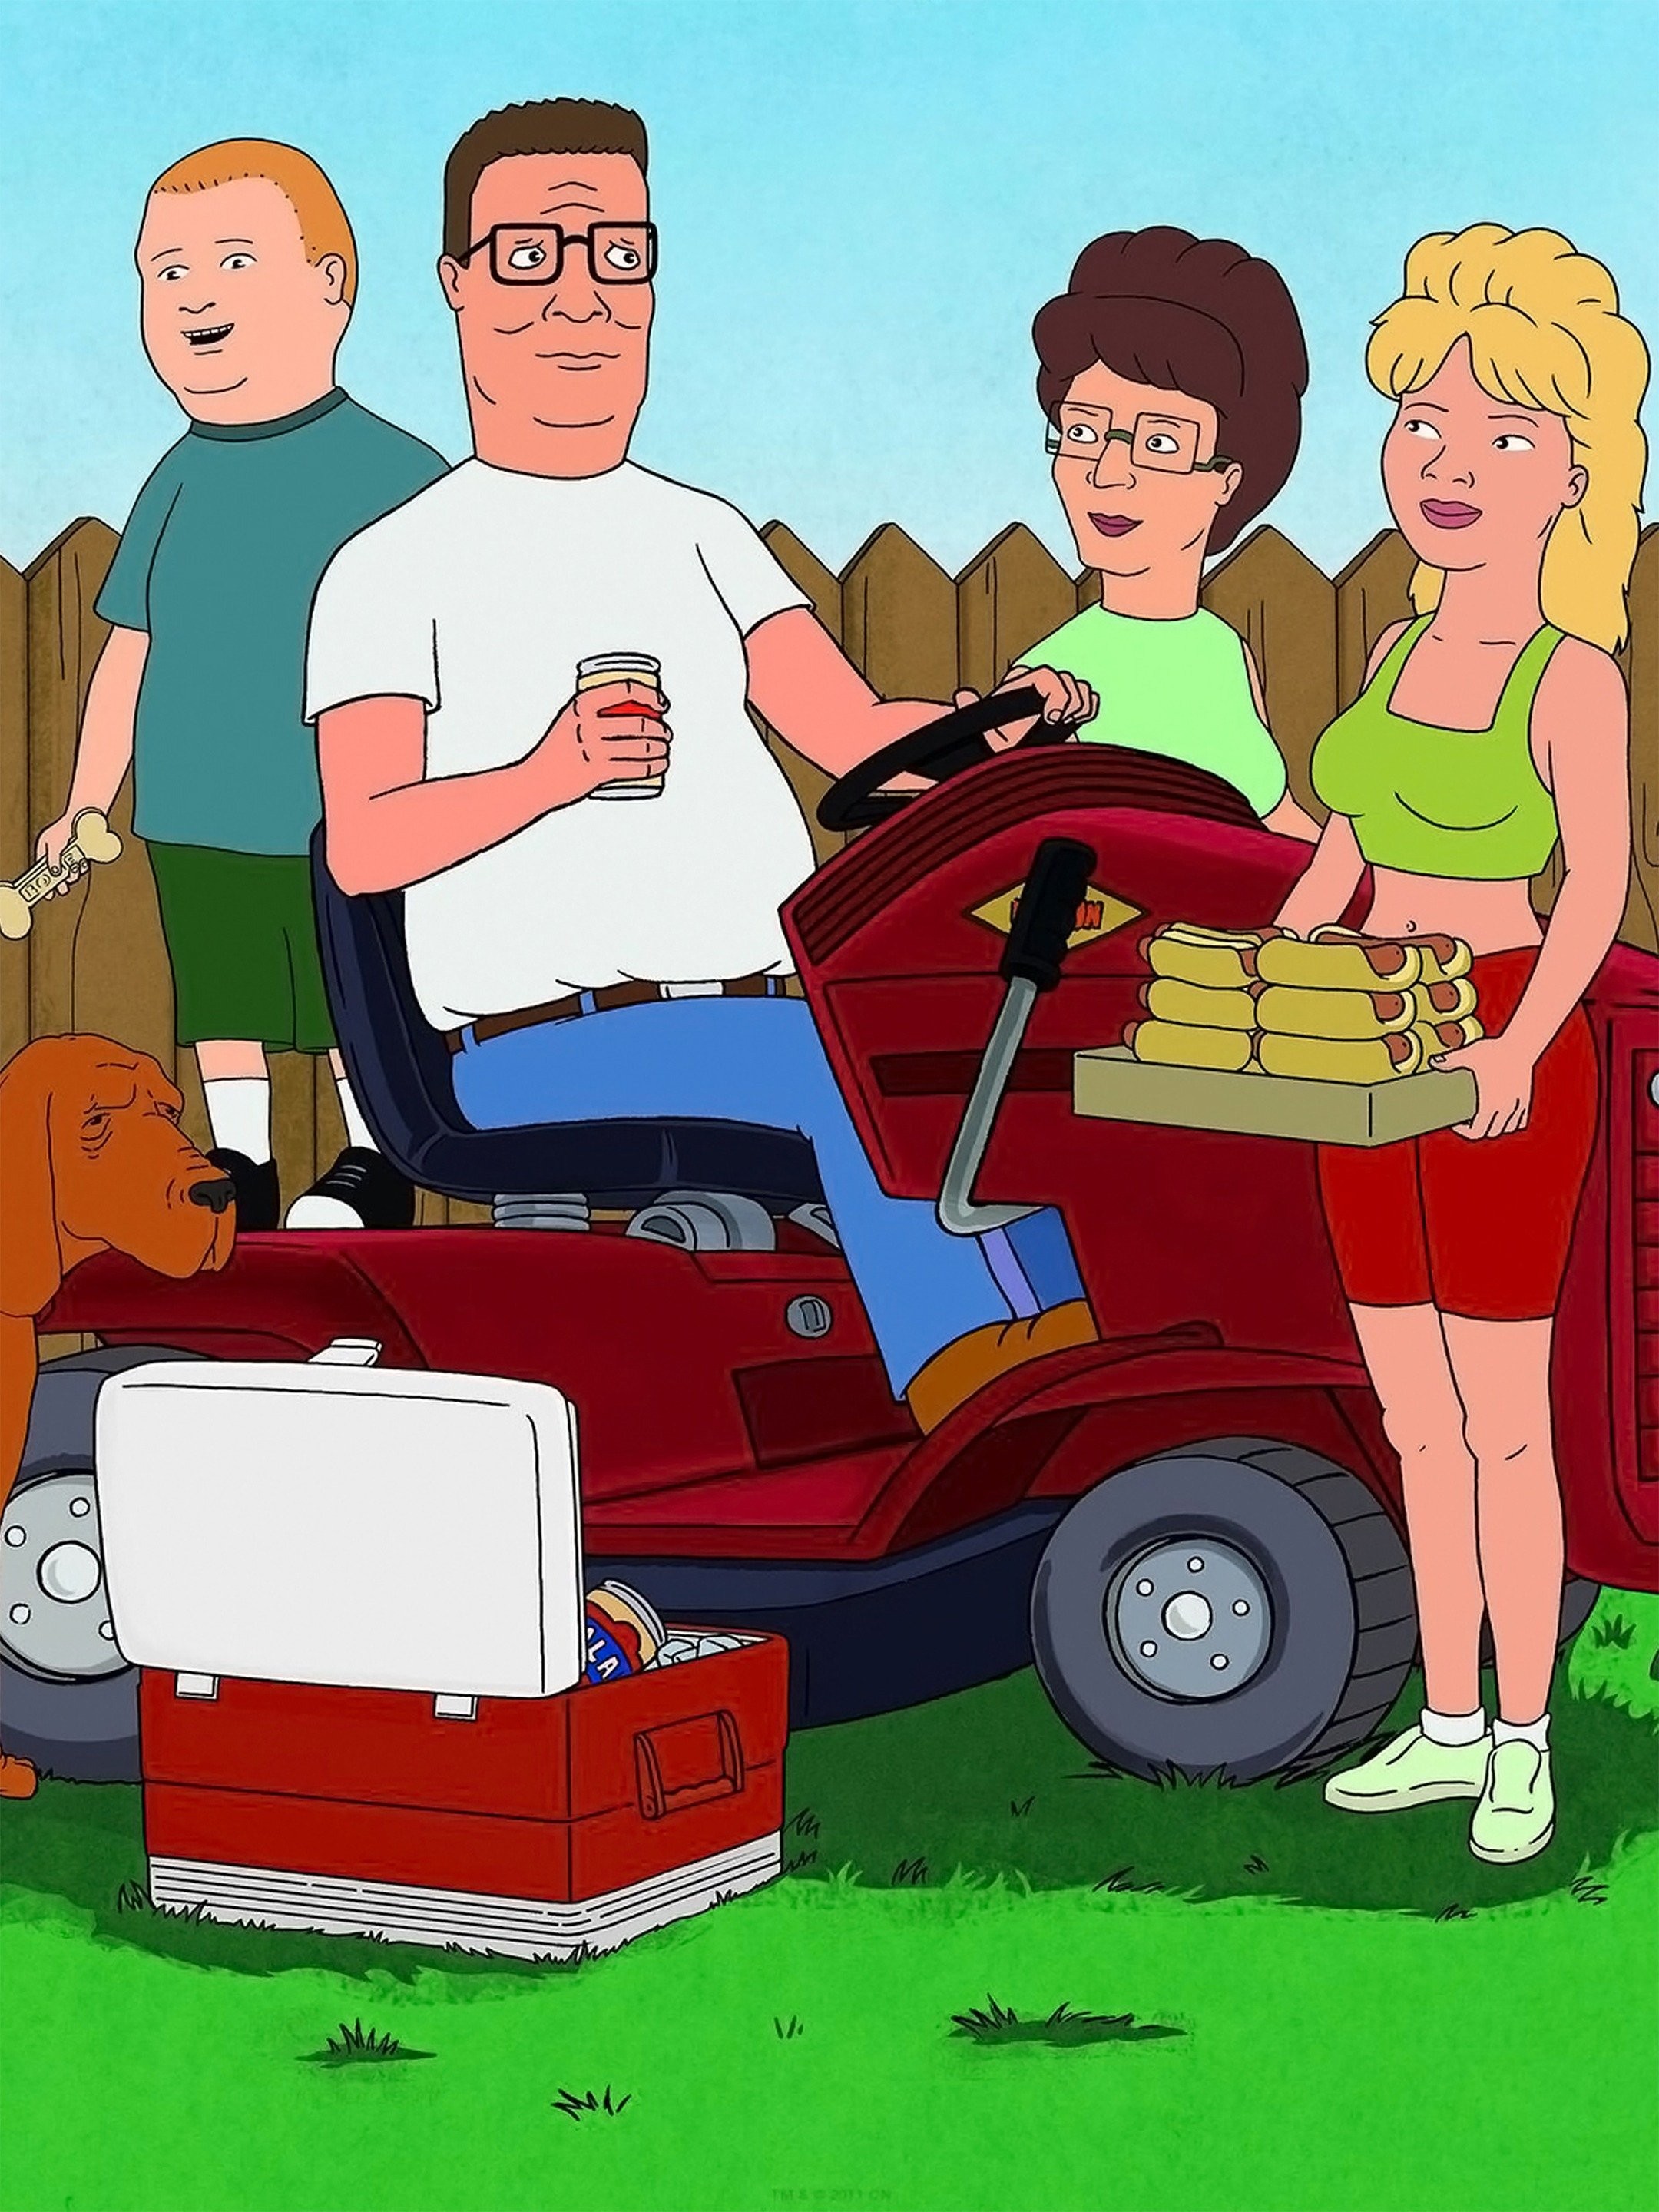 What Happened To The King Of The Hill Cast After It Was Canceled By Fox?